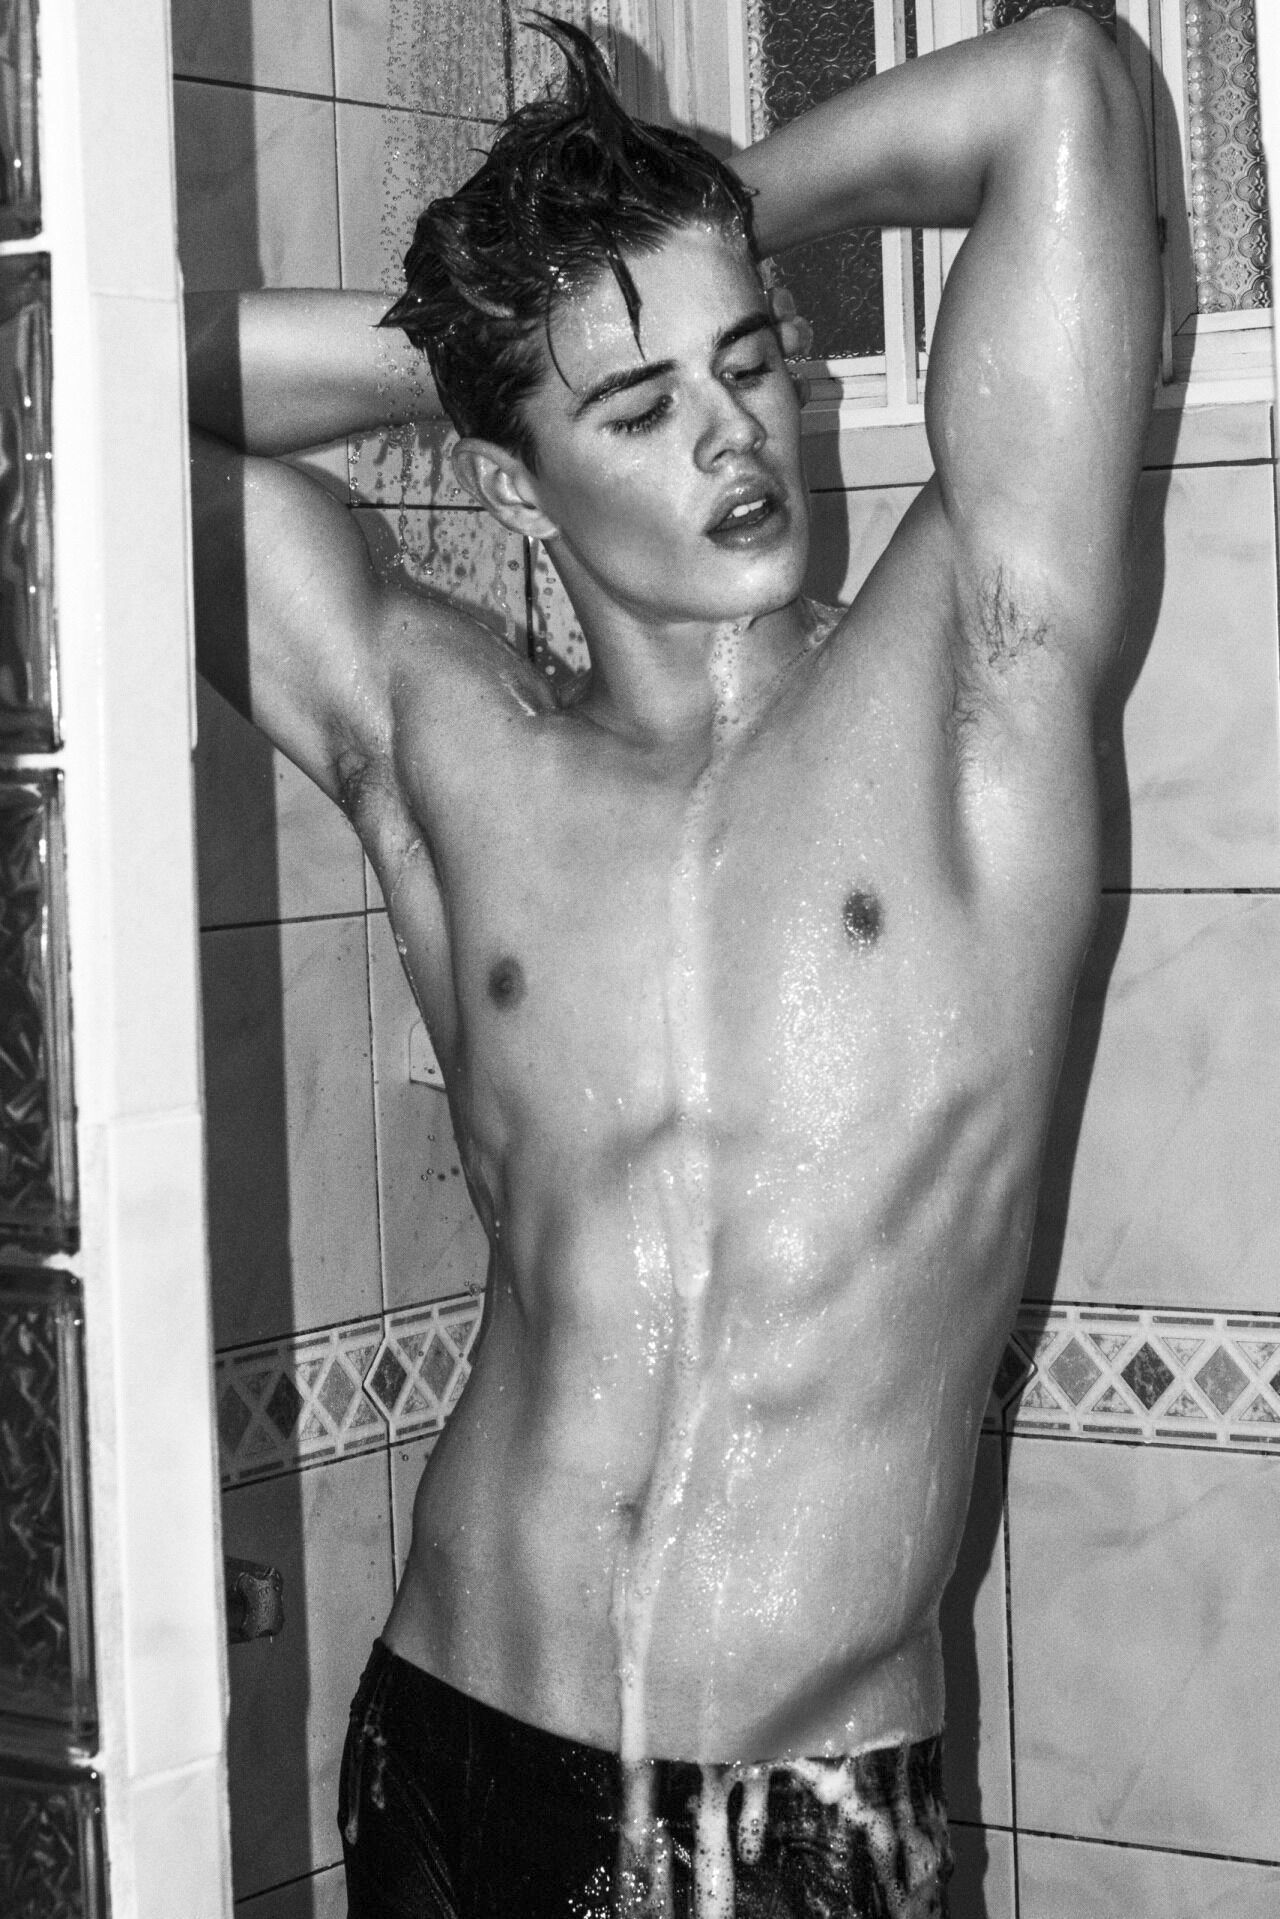 Taking Off:
The Shower Series, #537.
Click, reblog and follow. Pass me around to all your friends.